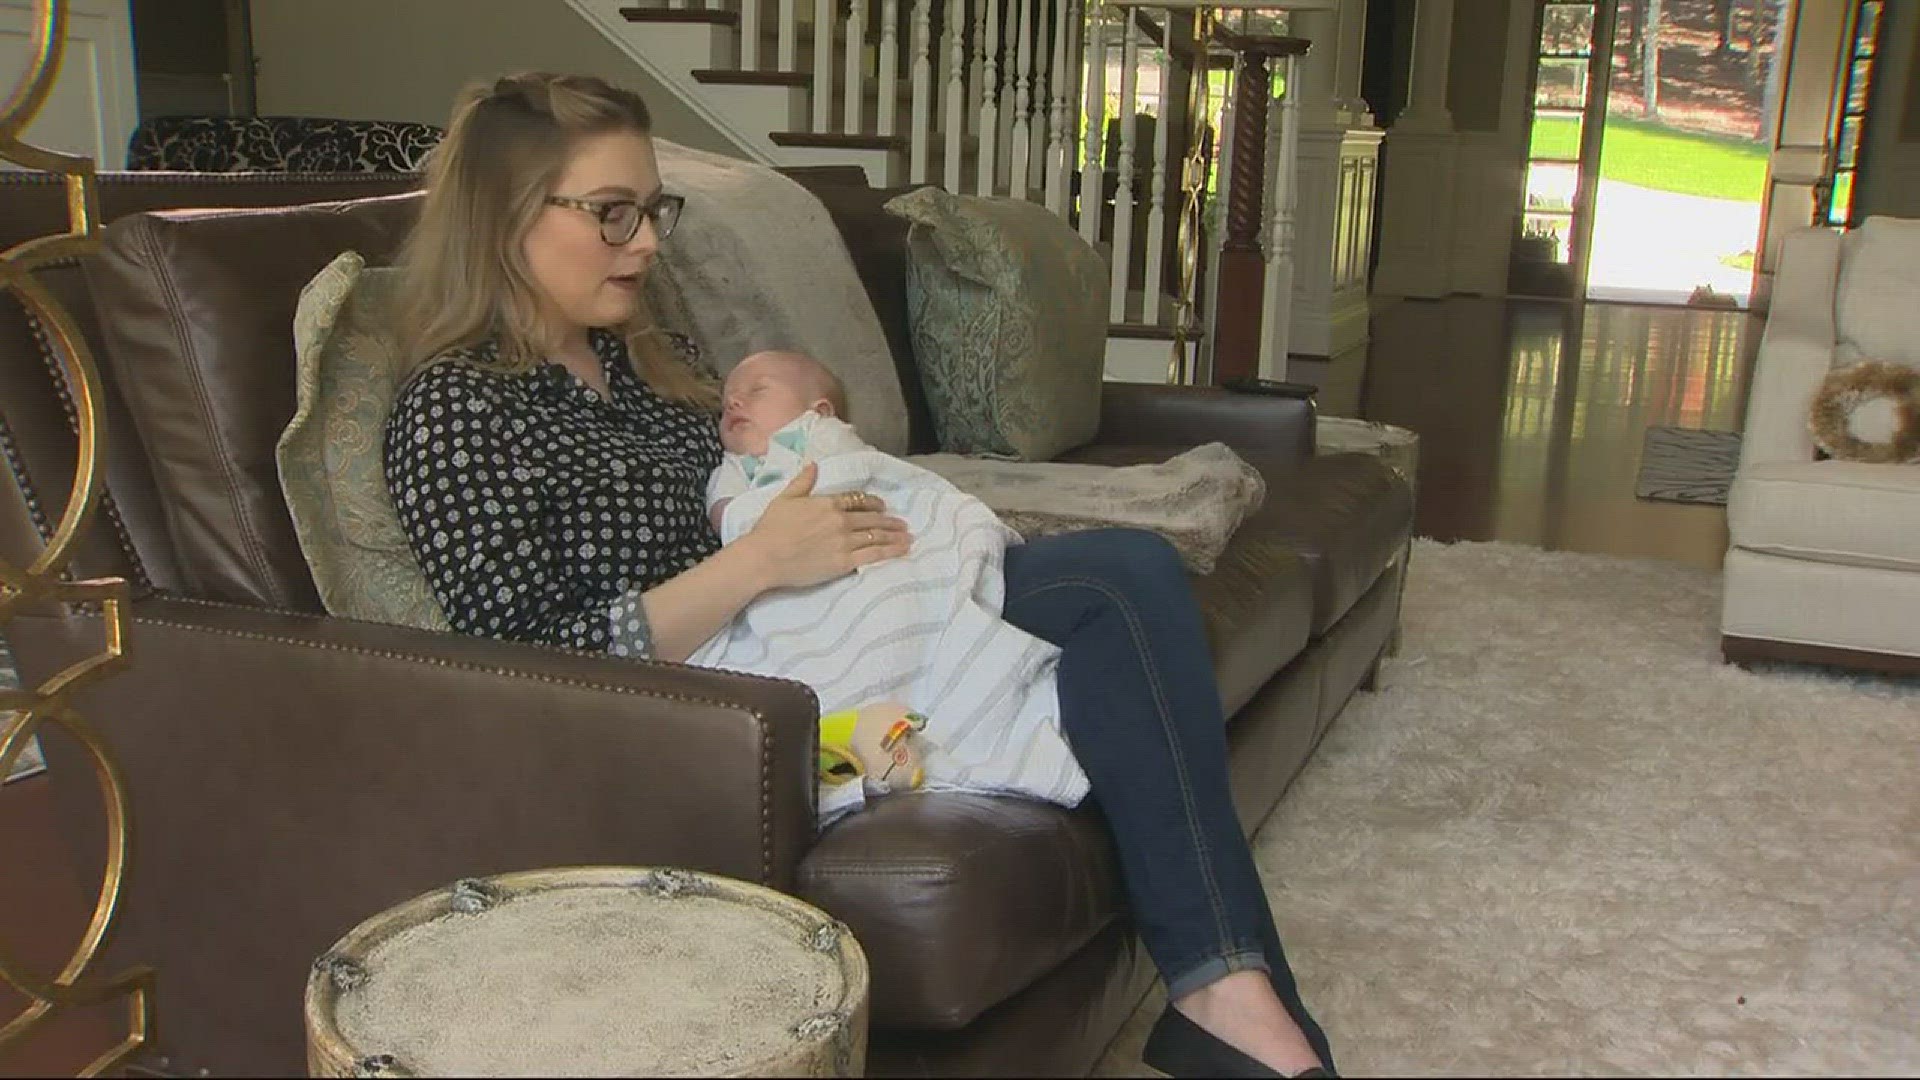 Parents say they found mold on baby wipes